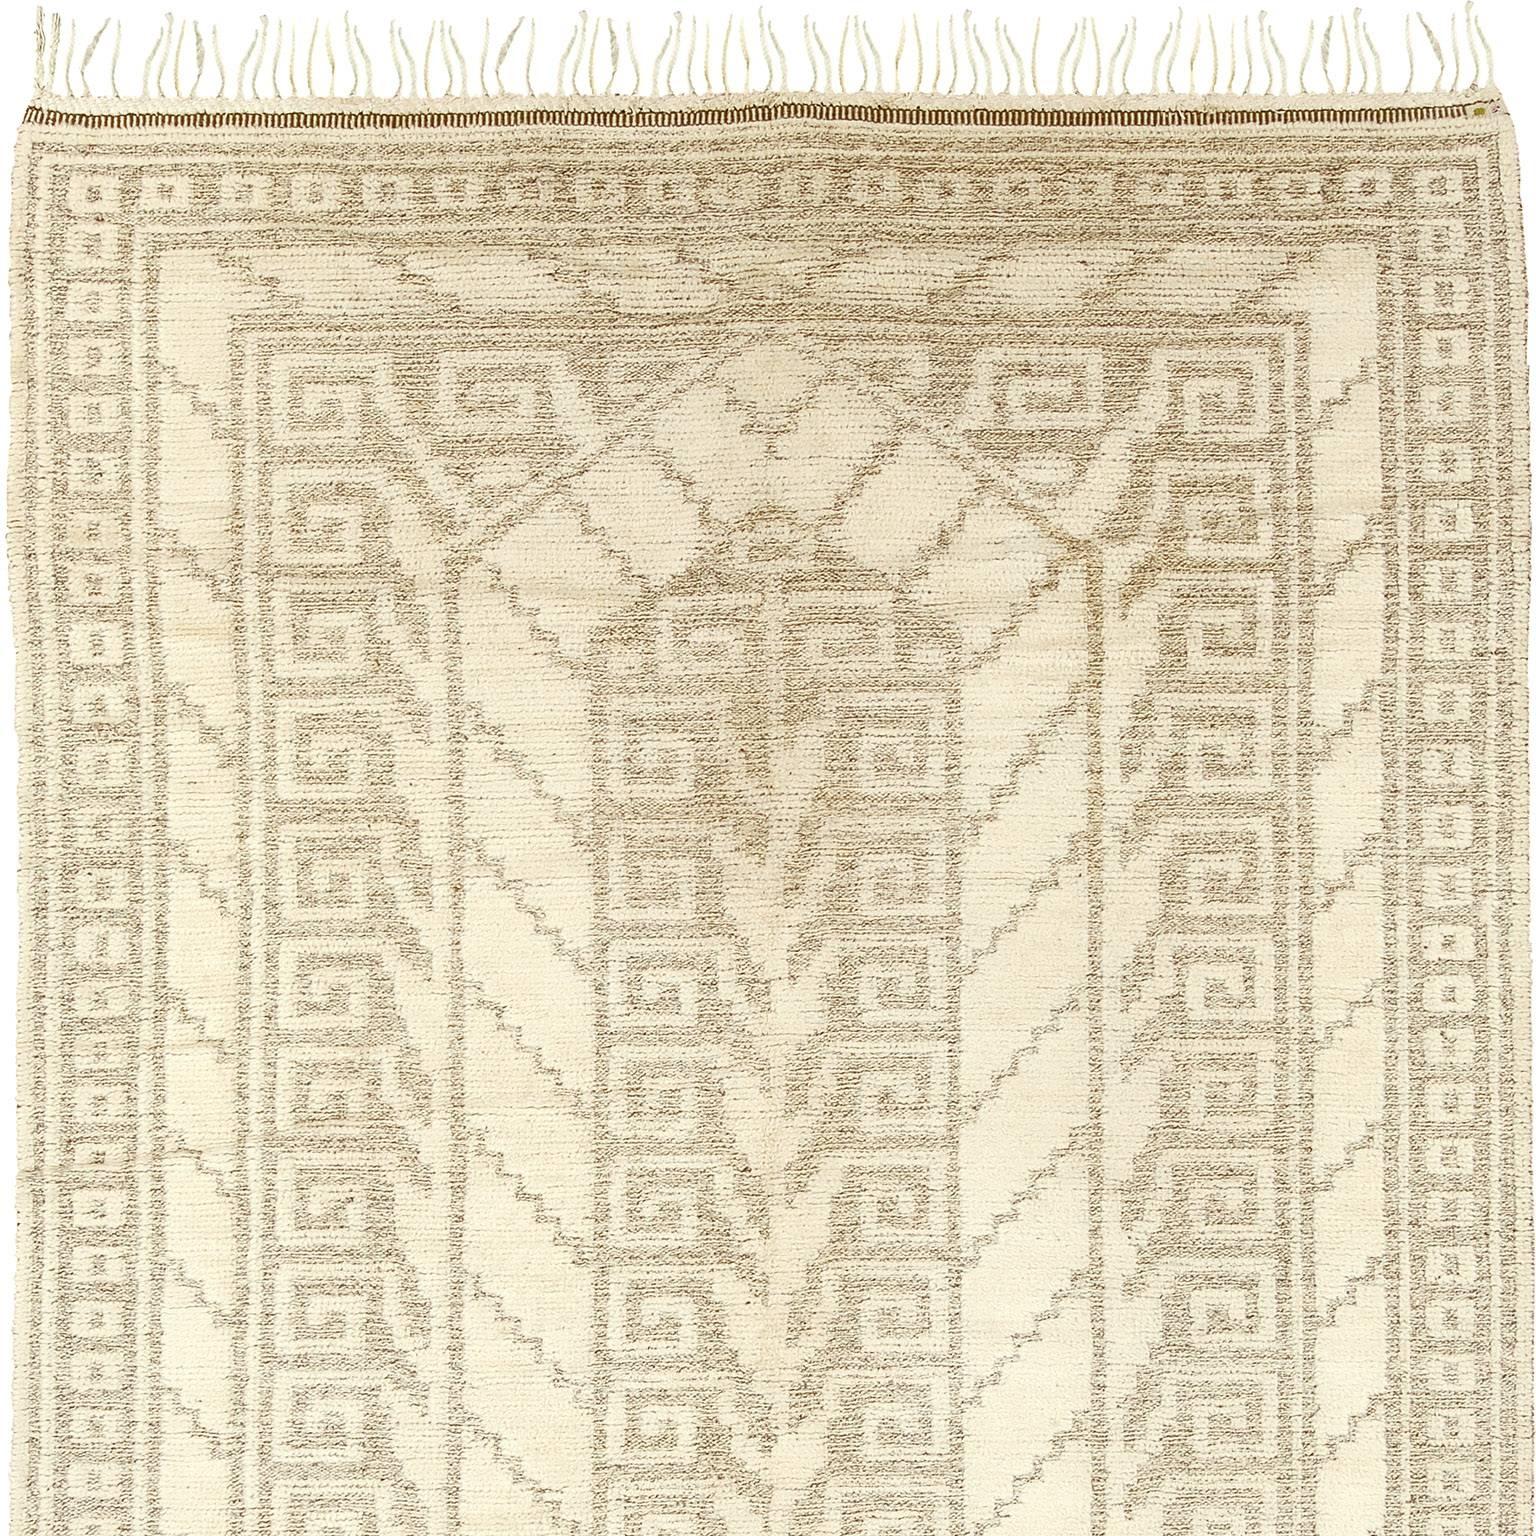 Mid-20th Century Swedish Pile Carpet by Märta Måås-Fjetterström In Good Condition For Sale In New York, NY